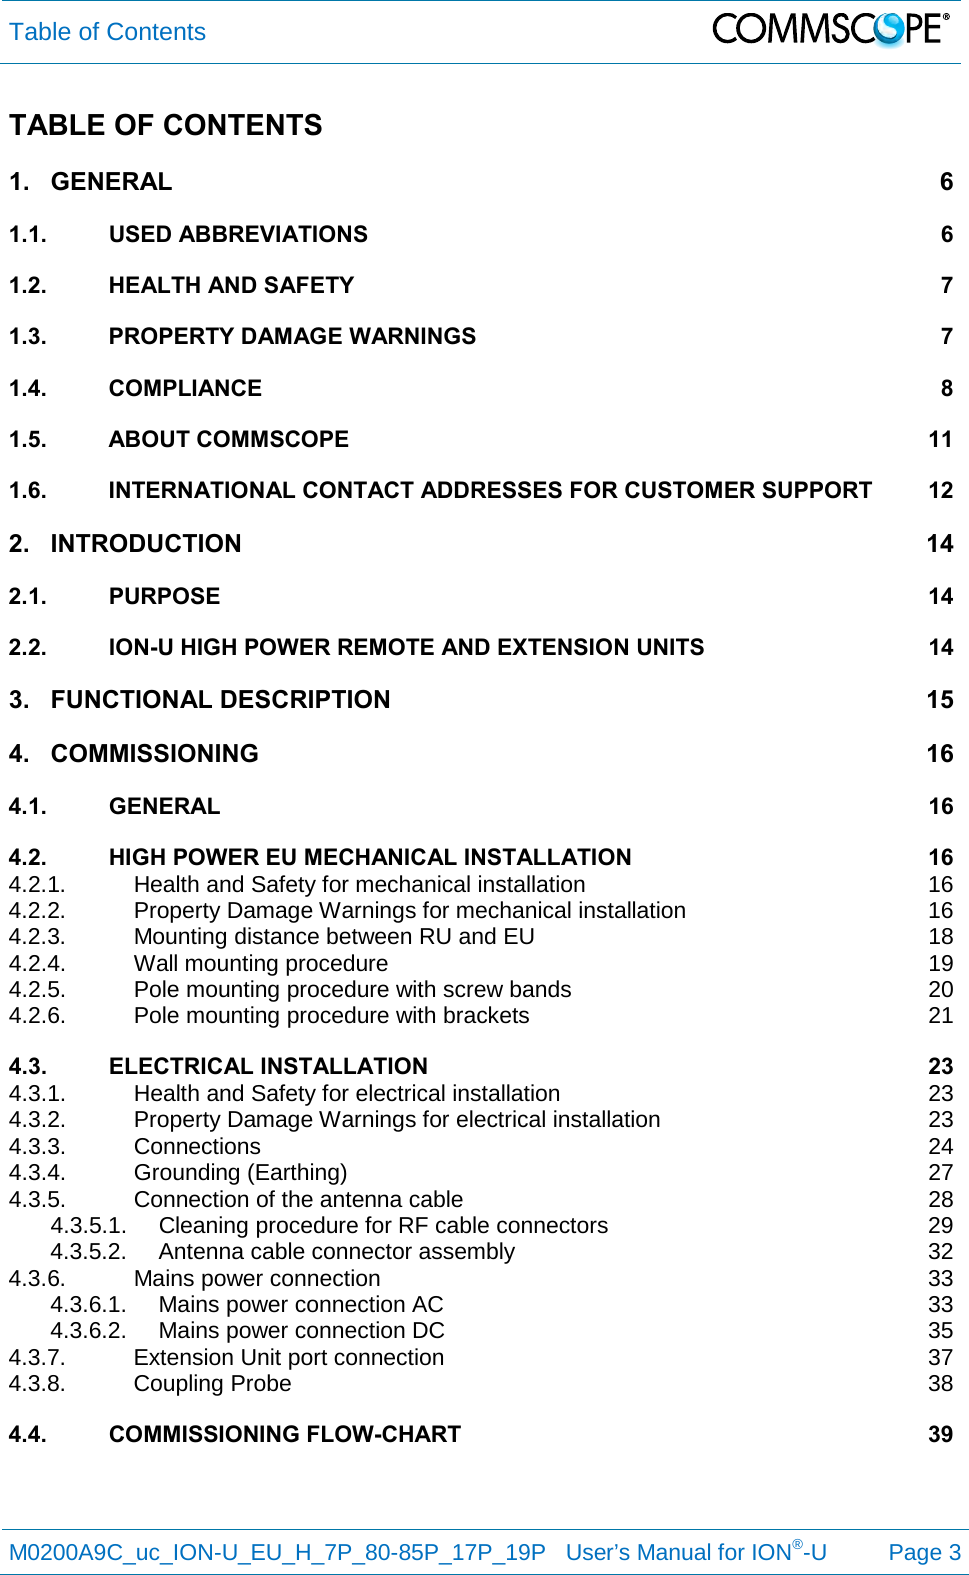 Table of Contents   M0200A9C_uc_ION-U_EU_H_7P_80-85P_17P_19P   User’s Manual for ION®-U  Page 3  TABLE OF CONTENTS 1. GENERAL  6 1.1. USED ABBREVIATIONS  6 1.2. HEALTH AND SAFETY  7 1.3. PROPERTY DAMAGE WARNINGS  7 1.4. COMPLIANCE  8 1.5. ABOUT COMMSCOPE 11 1.6. INTERNATIONAL CONTACT ADDRESSES FOR CUSTOMER SUPPORT 12 2. INTRODUCTION 14 2.1. PURPOSE 14 2.2. ION-U HIGH POWER REMOTE AND EXTENSION UNITS 14 3. FUNCTIONAL DESCRIPTION 15 4. COMMISSIONING 16 4.1. GENERAL  16 4.2. HIGH POWER EU MECHANICAL INSTALLATION 16 4.2.1. Health and Safety for mechanical installation 16 4.2.2. Property Damage Warnings for mechanical installation 16 4.2.3. Mounting distance between RU and EU 18 4.2.4. Wall mounting procedure 19 4.2.5. Pole mounting procedure with screw bands 20 4.2.6. Pole mounting procedure with brackets 21 4.3. ELECTRICAL INSTALLATION 23 4.3.1. Health and Safety for electrical installation 23 4.3.2. Property Damage Warnings for electrical installation 23 4.3.3. Connections 24 4.3.4. Grounding (Earthing) 27 4.3.5. Connection of the antenna cable 28 4.3.5.1. Cleaning procedure for RF cable connectors 29 4.3.5.2. Antenna cable connector assembly 32 4.3.6. Mains power connection 33 4.3.6.1. Mains power connection AC 33 4.3.6.2. Mains power connection DC 35 4.3.7. Extension Unit port connection 37 4.3.8. Coupling Probe 38 4.4. COMMISSIONING FLOW-CHART 39   